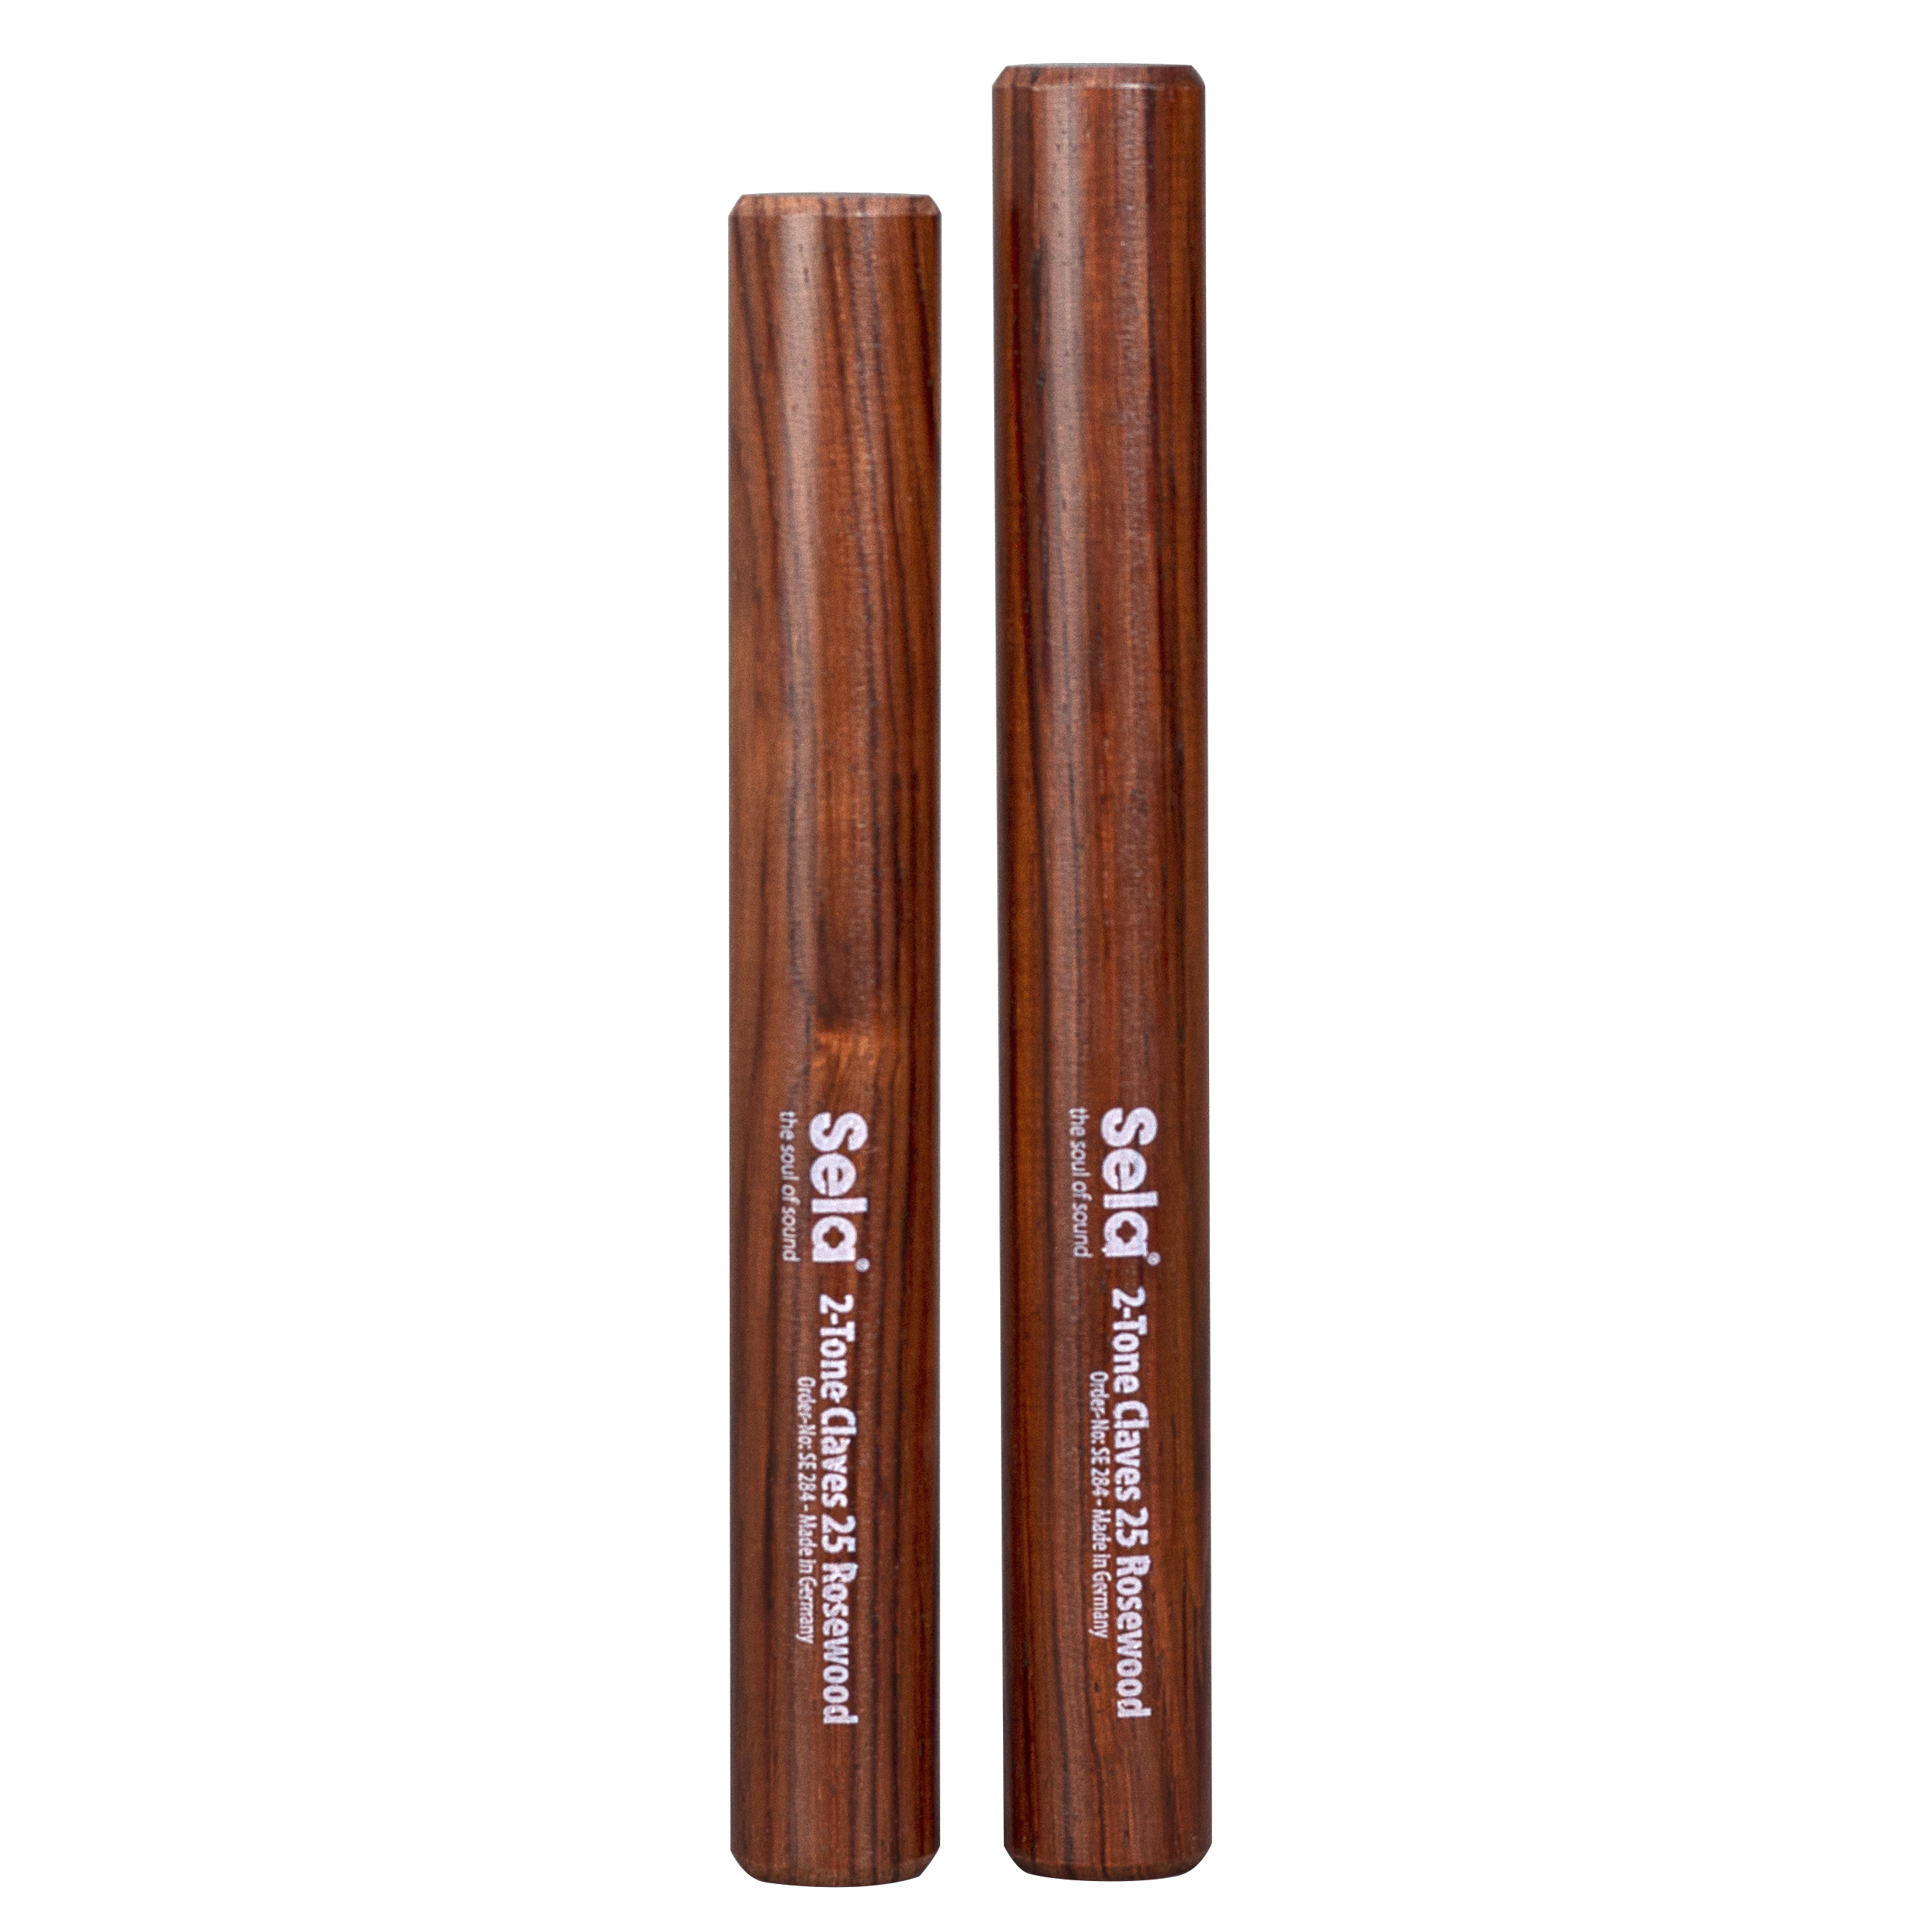 2-Tone Claves 25 Rosewood